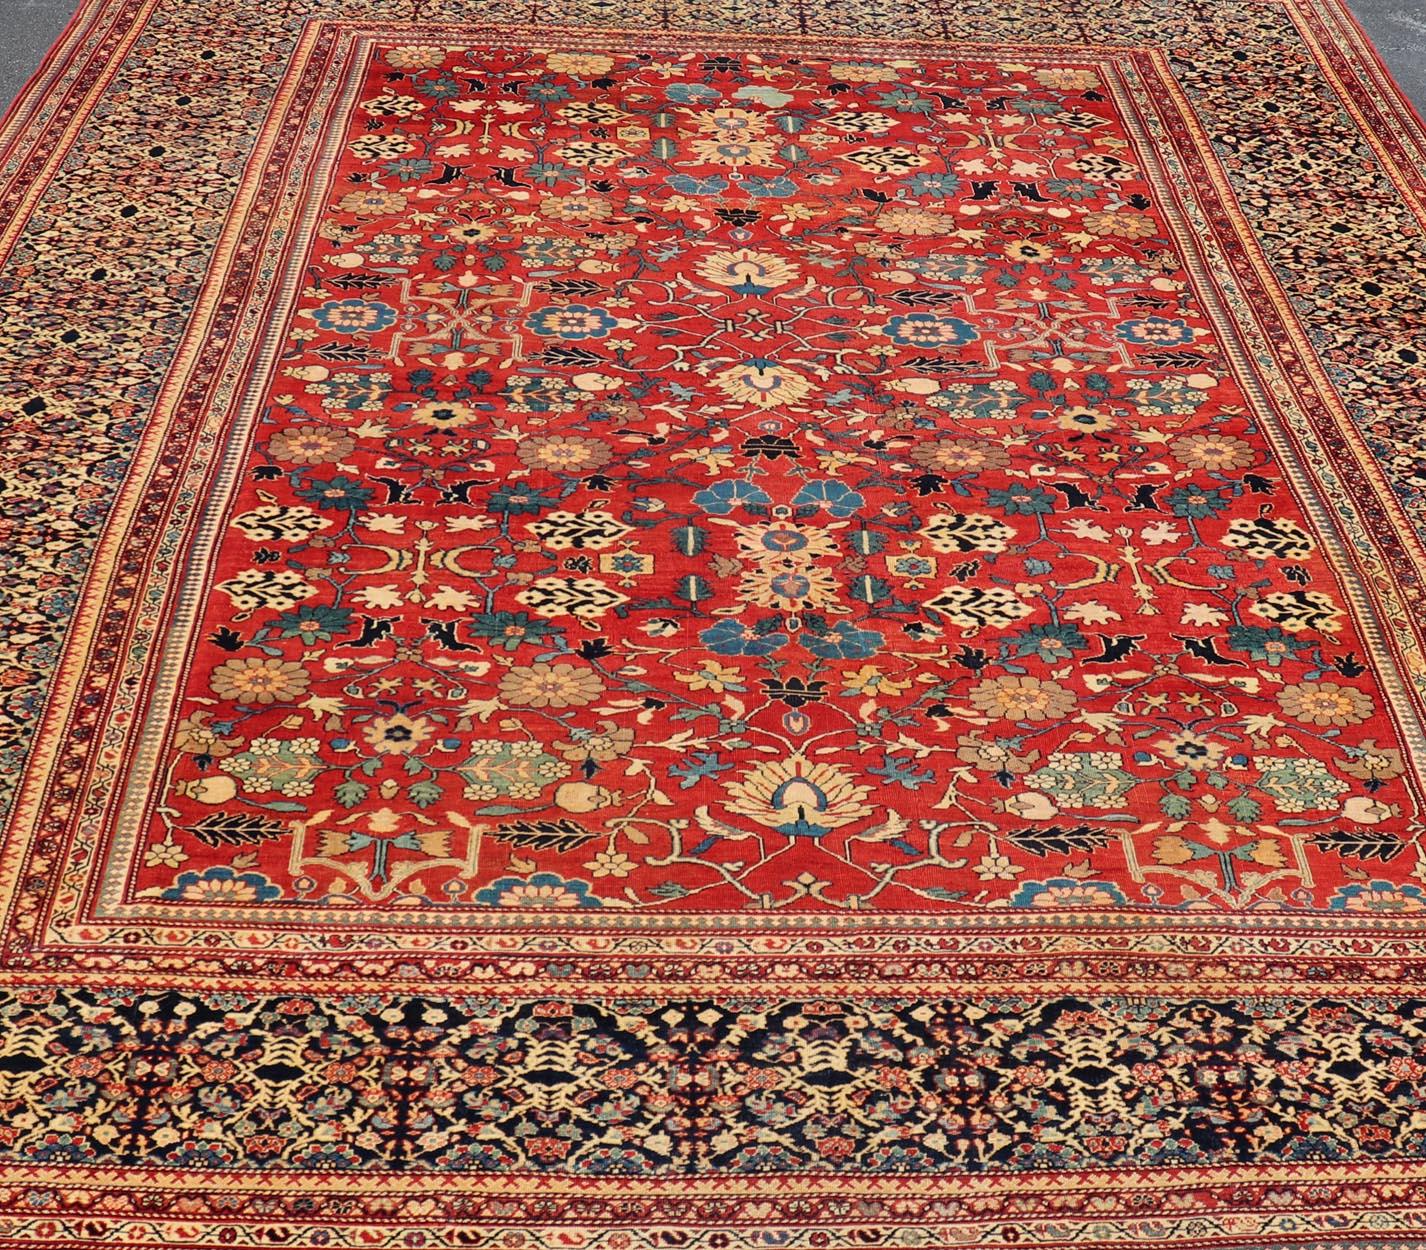 Very Finely Woven Antique Farahan Sarouk Rug with Intricate Border Design. Keivan Woven Arts / rug / L11-0609 / country of origin / type: Iran / Sarouk Farahan, circa 1880's.
Measures: 10'7 x 13'10.
This immaculately woven Farahan Sarouk rug with a